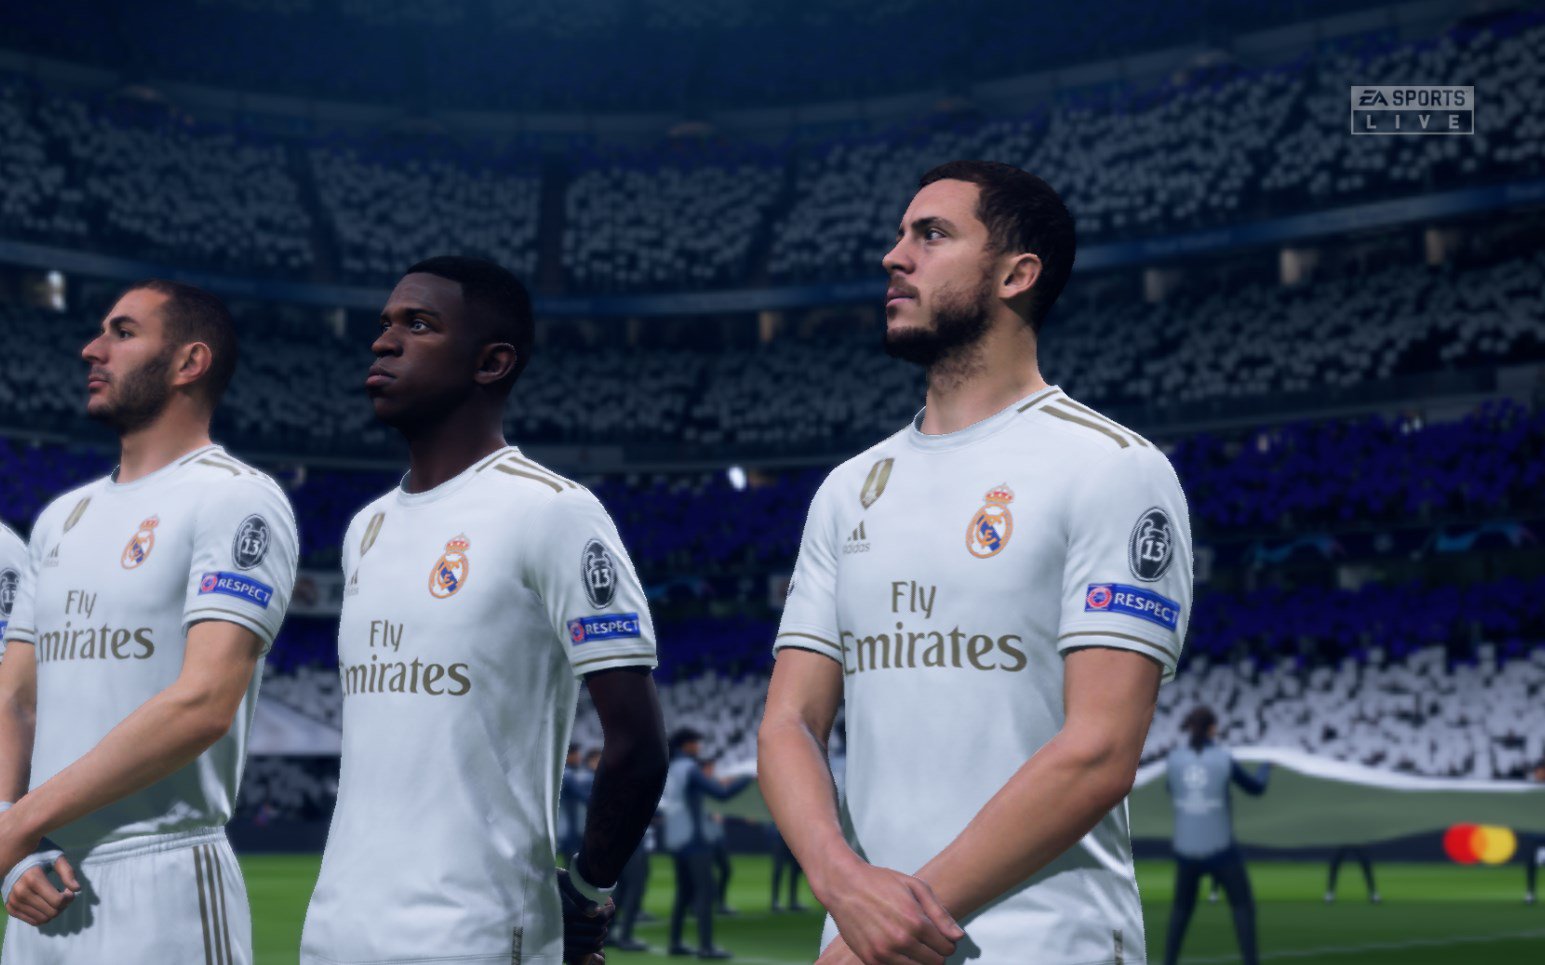 Fifa 19 Download For Mac